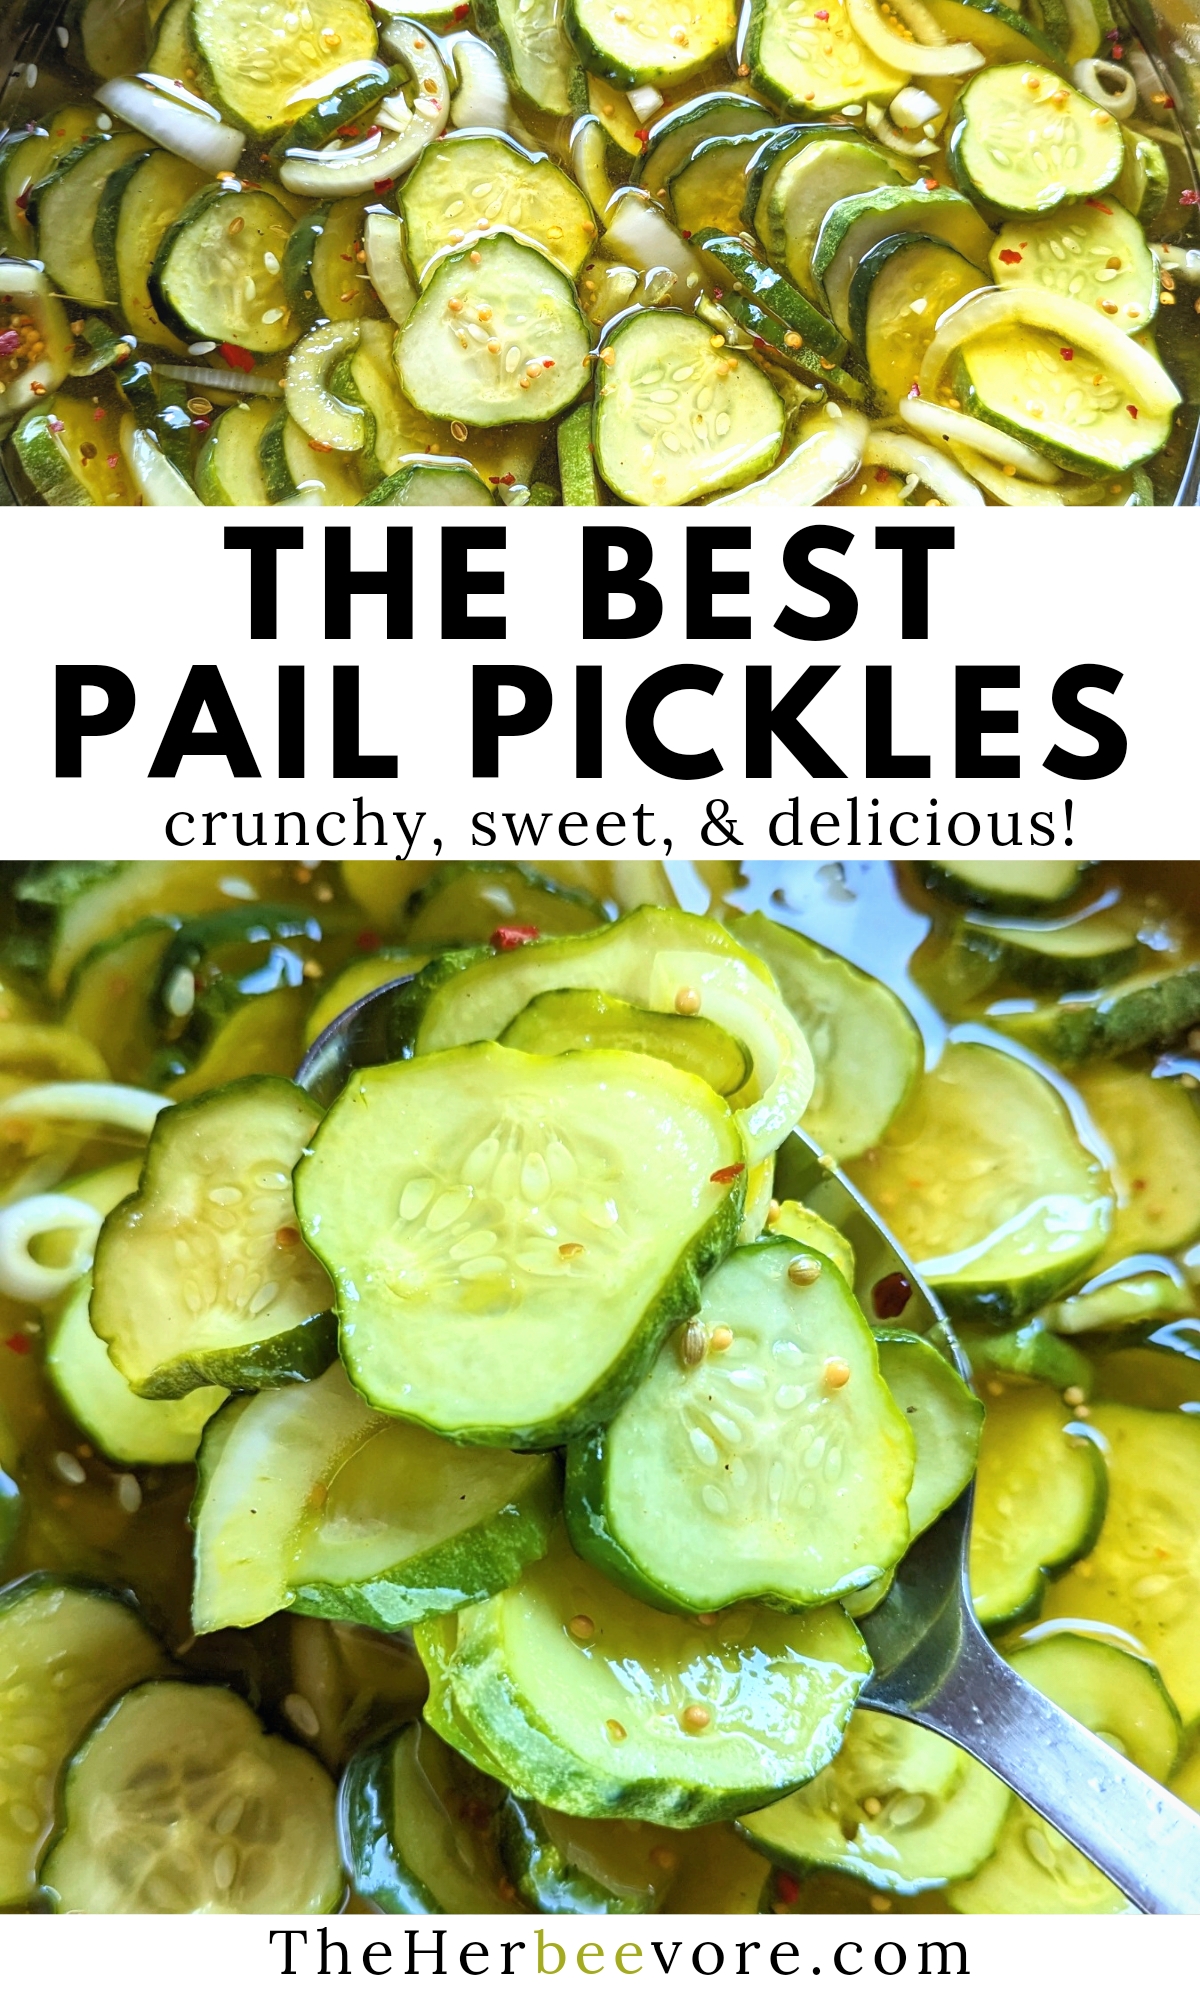 pail pickles in a bucket recipe sweet bread and butter pickles no cook pickle recipes for summer cucumbers